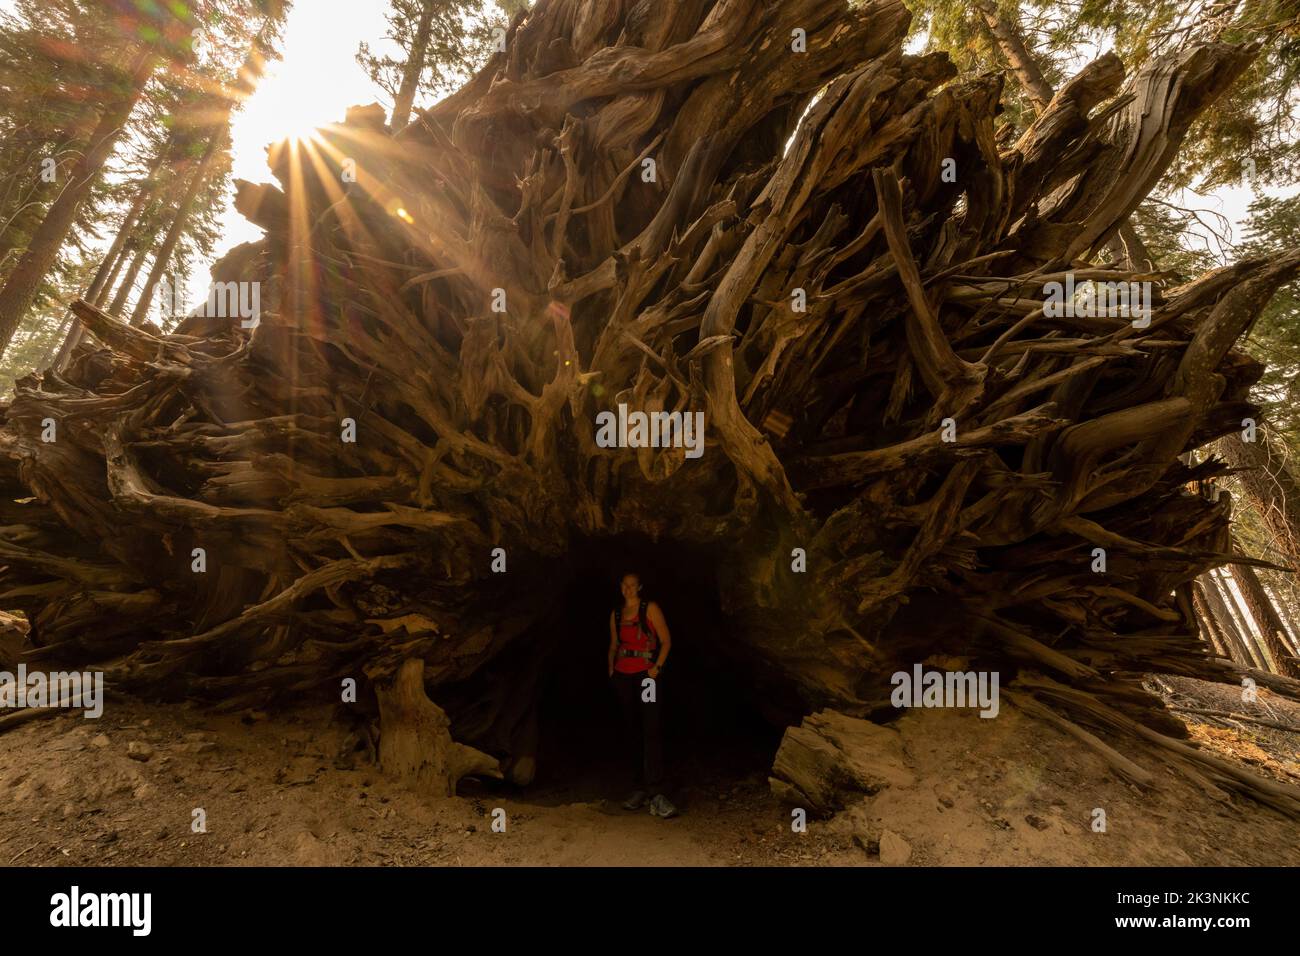 Woman Stands In The Cavernous Roots of a Sequoia Tree root system Stock Photo